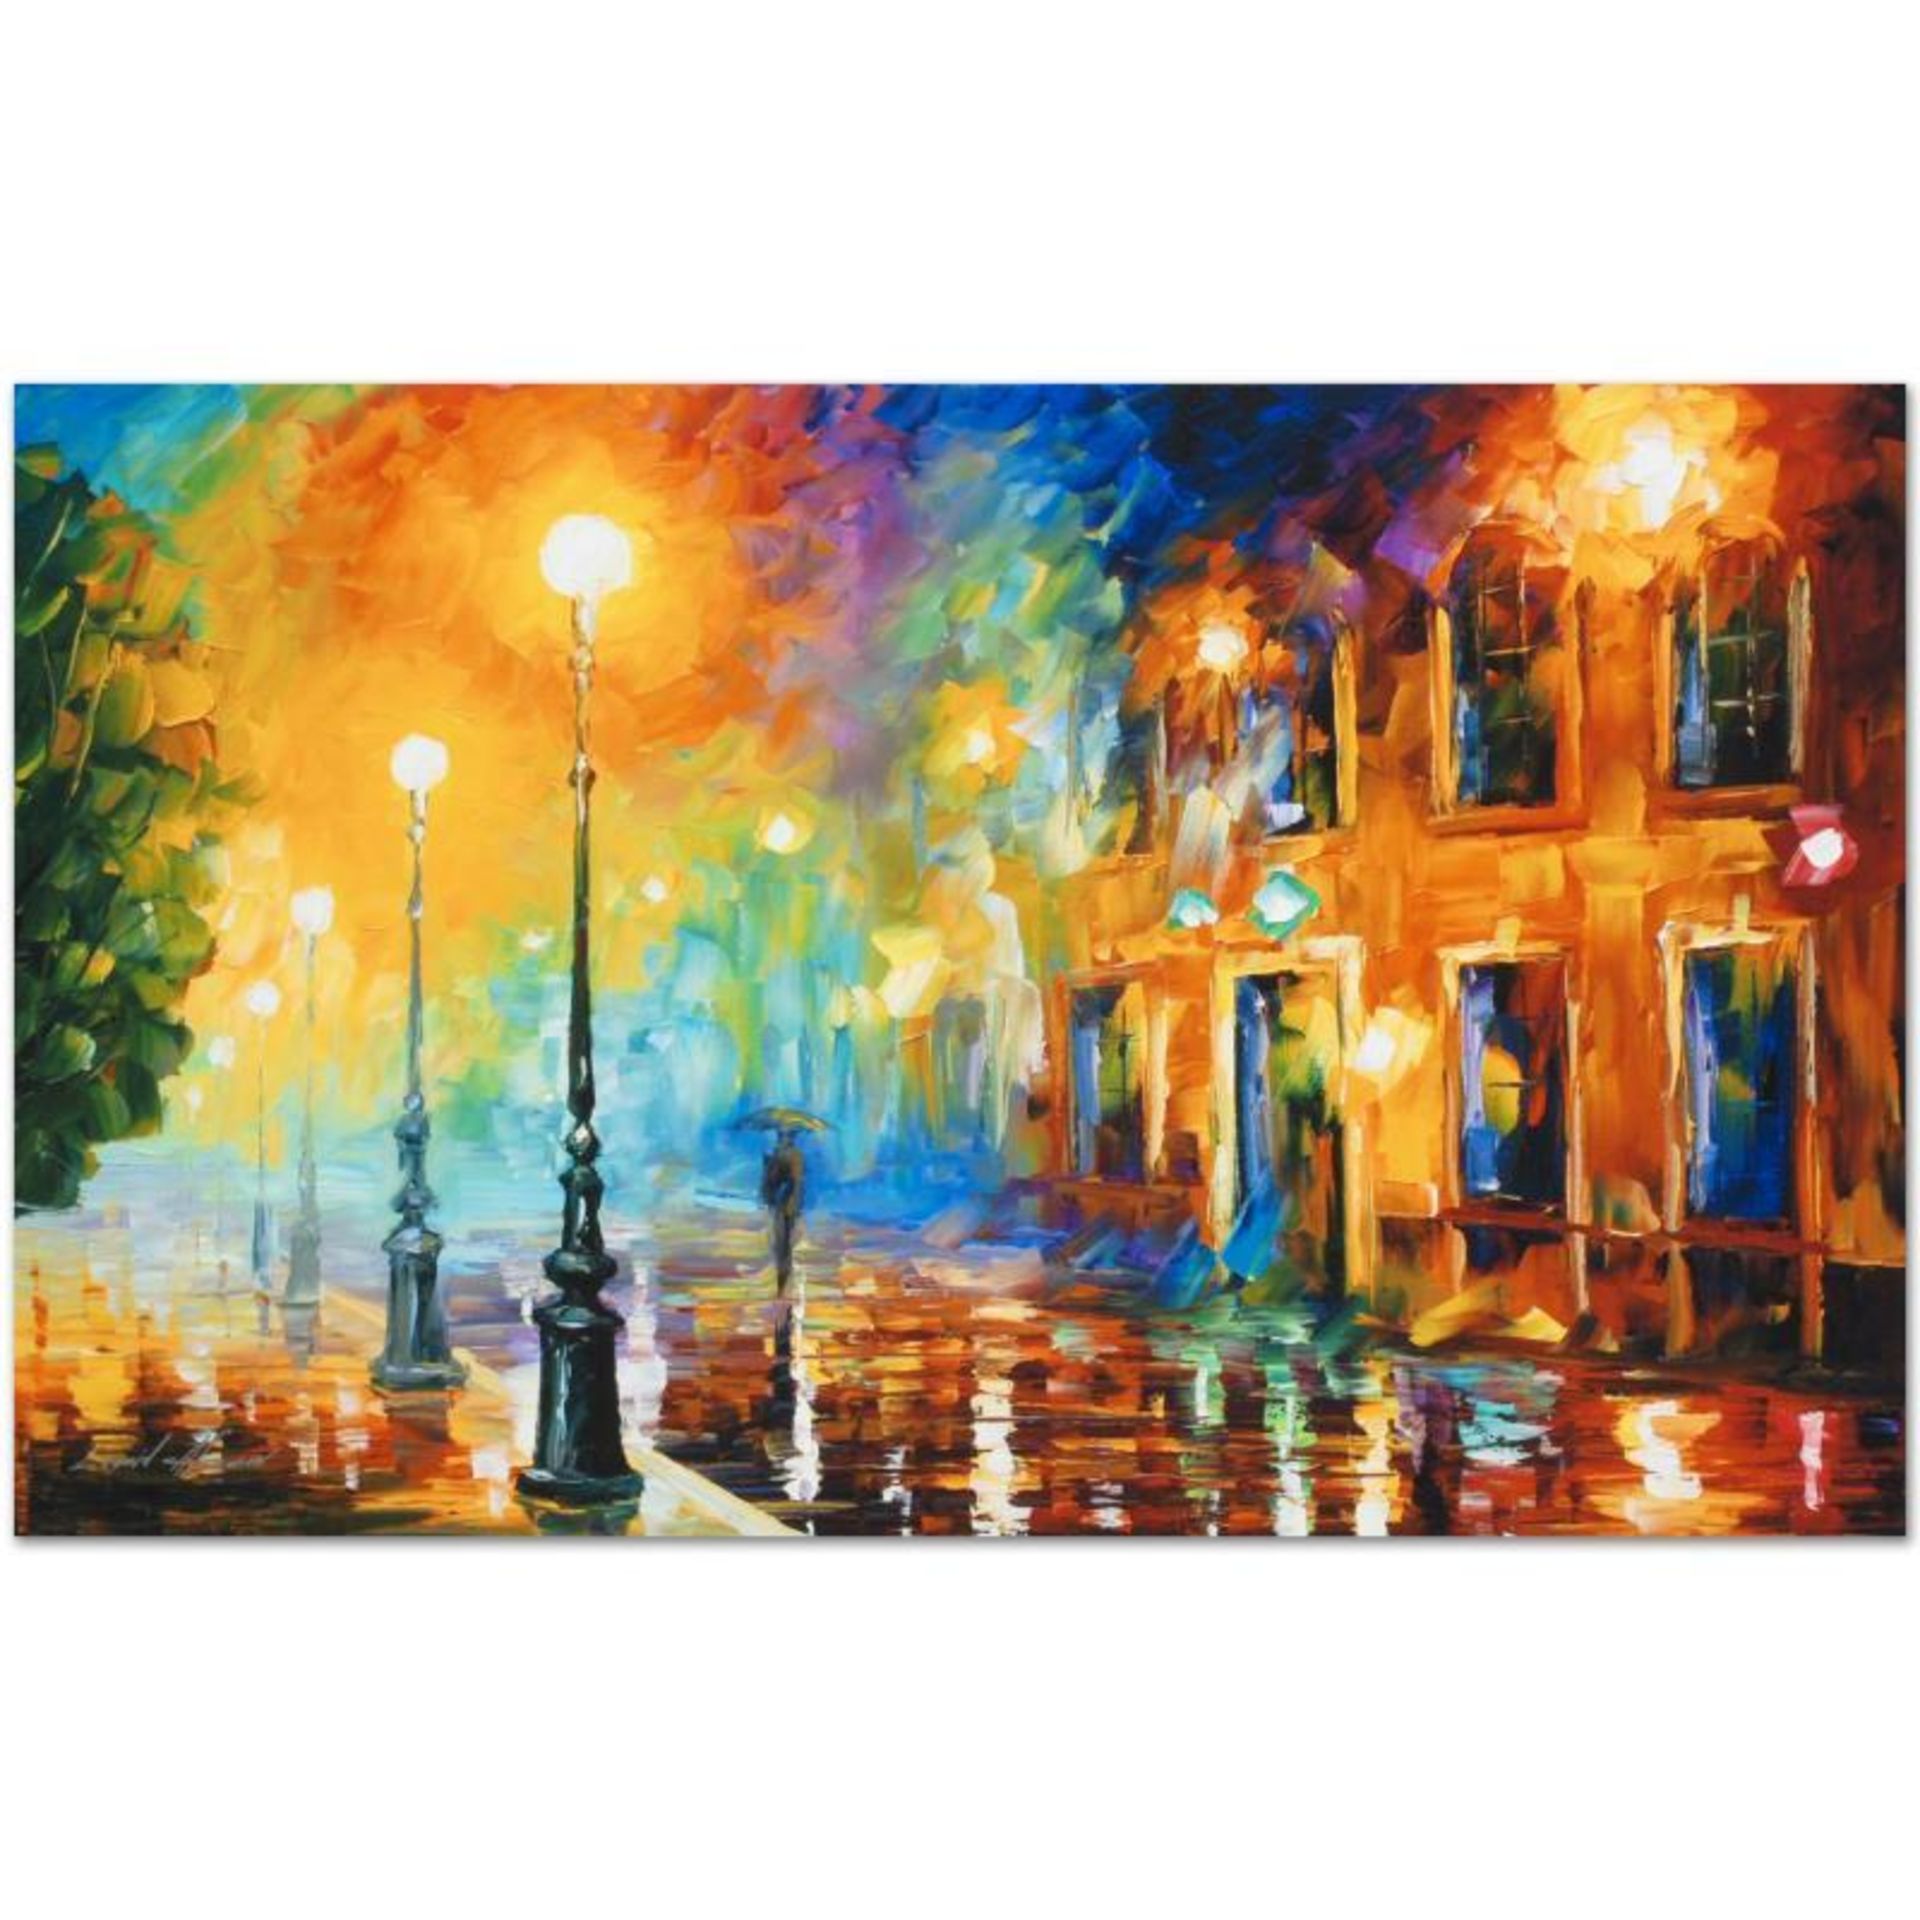 Leonid Afremov (1955-2019) "Misty City" Limited Edition Giclee on Canvas, Number